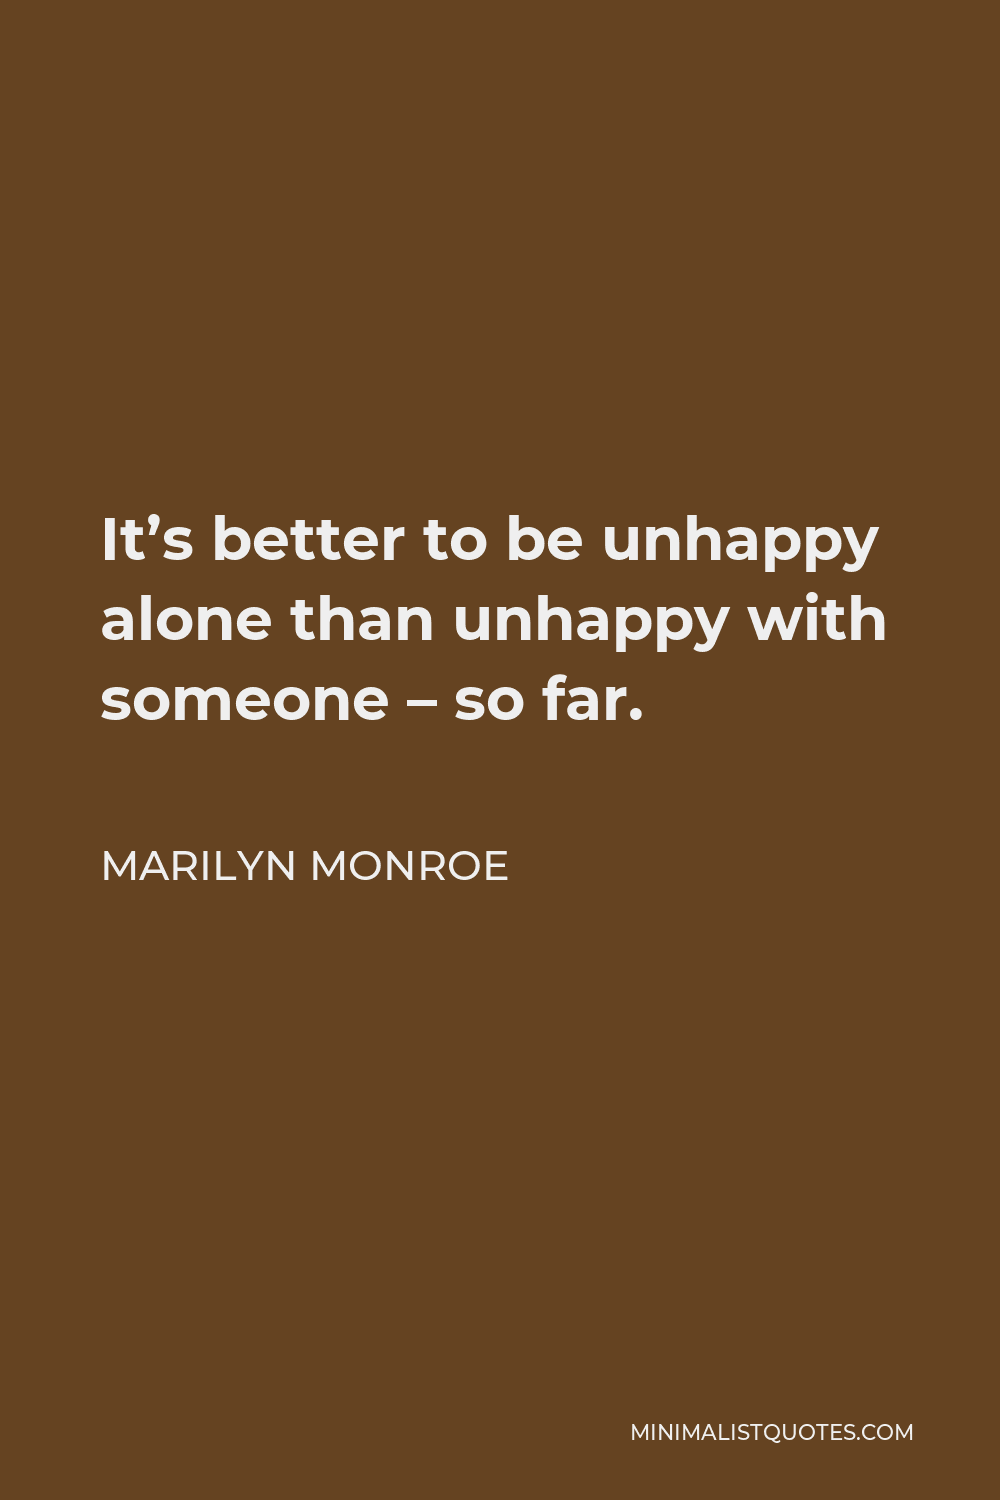 Marilyn Monroe Quote - It’s better to be unhappy alone than unhappy with someone – so far.